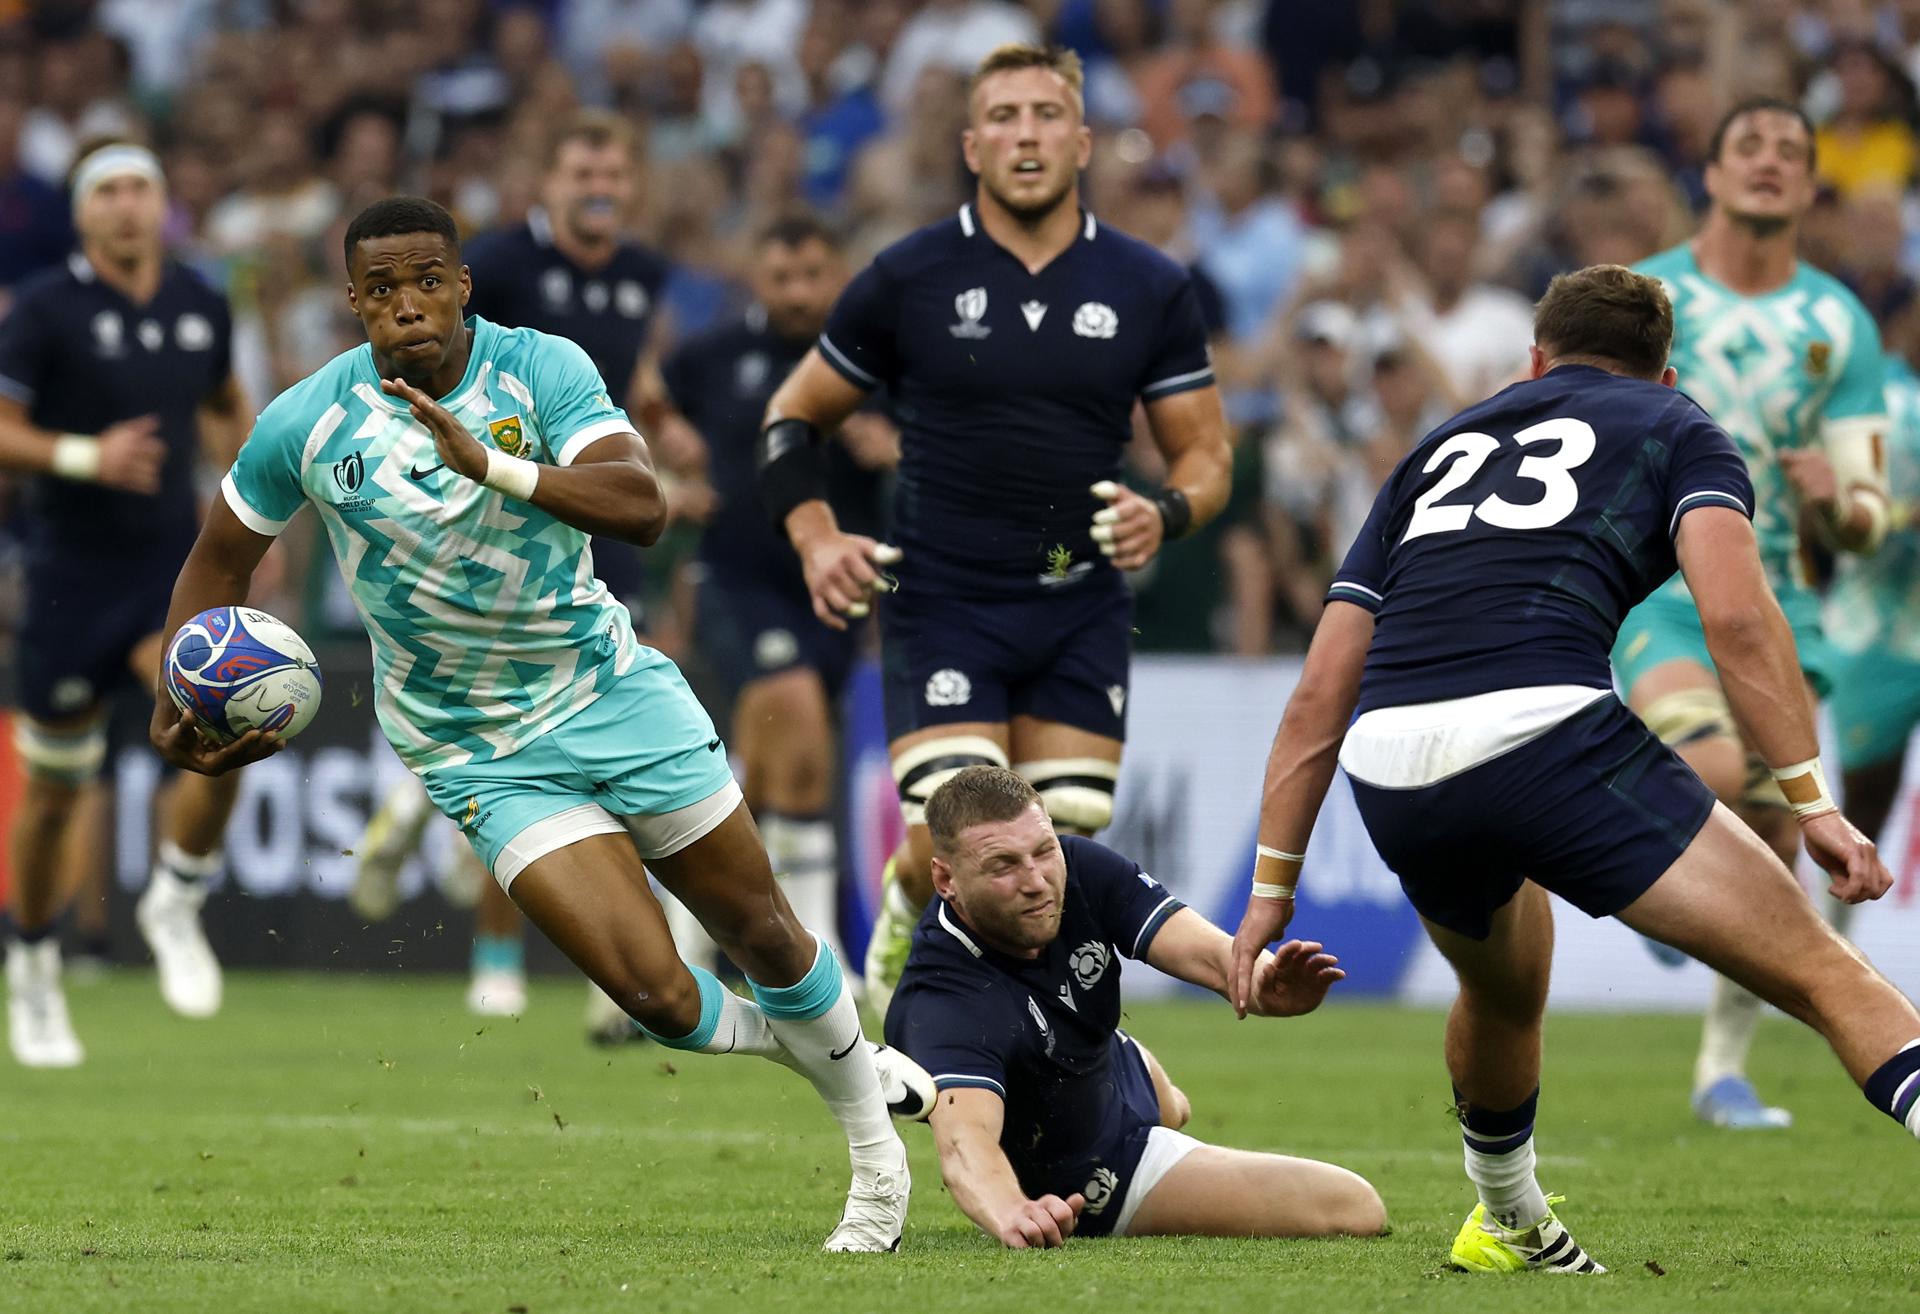 South Africa's Grant Williams in action during the Rugby World Cup 2023 Pool B match between South Africa and Scotland, in Marseille, southern France, 10 September 2023. EFE-EPA/SEBASTIEN NOGIER
